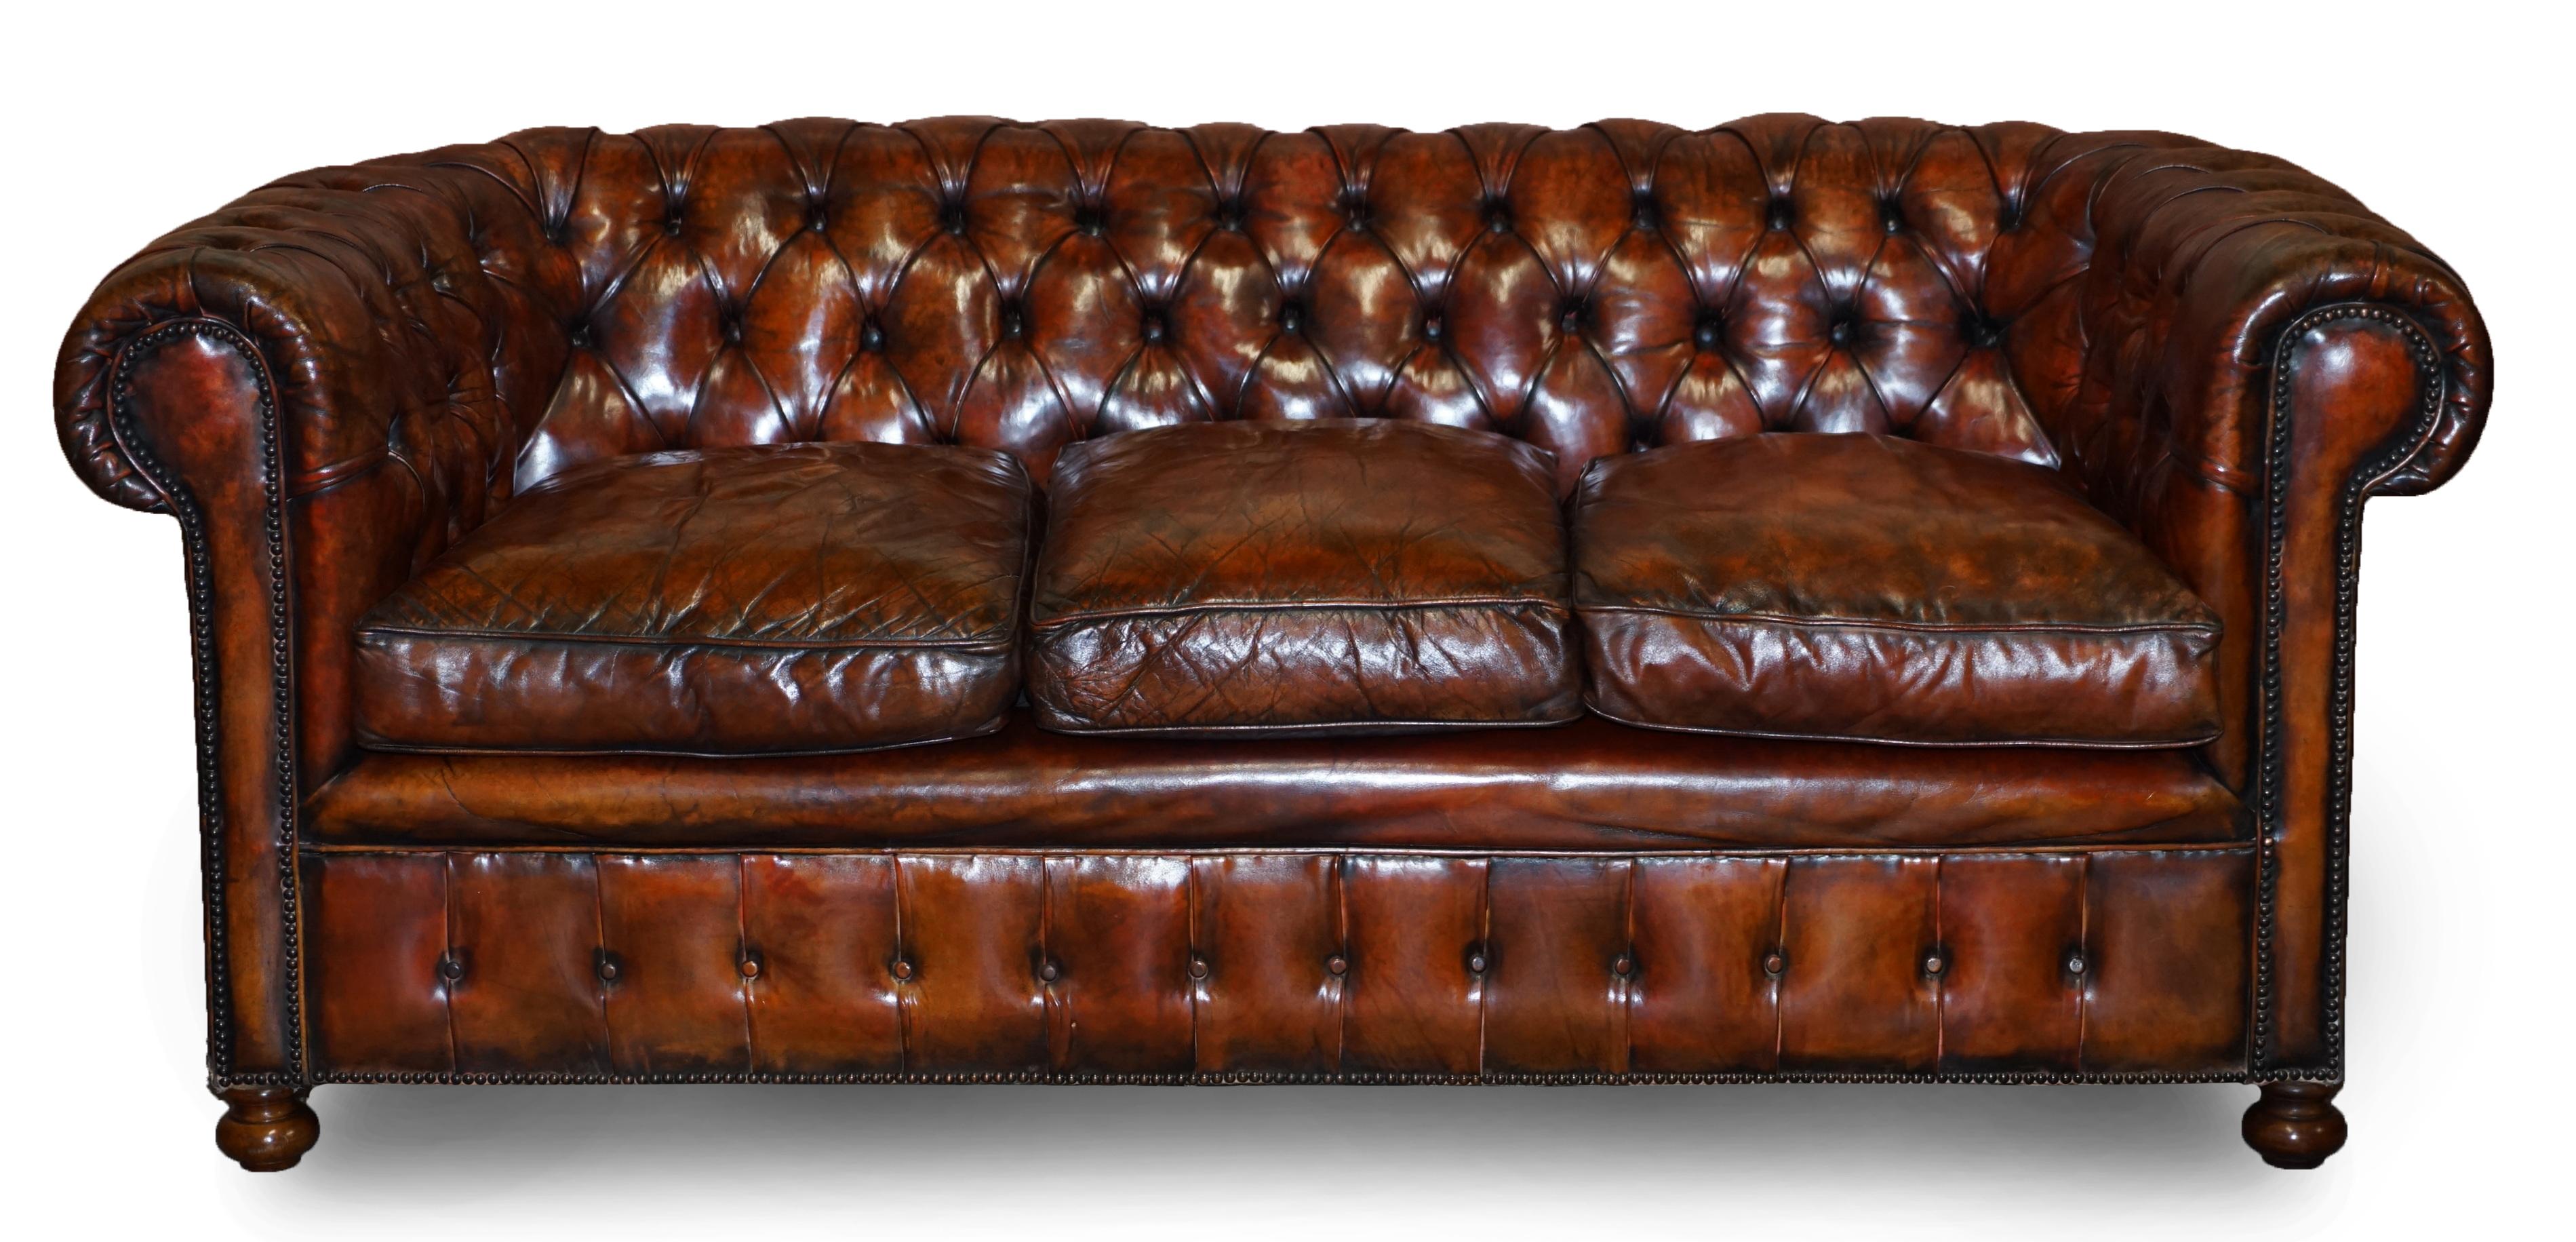 Late Victorian Rare Victorian Chesterfield Brown Leather Six Piece Sofa Armchairs Stool Suite